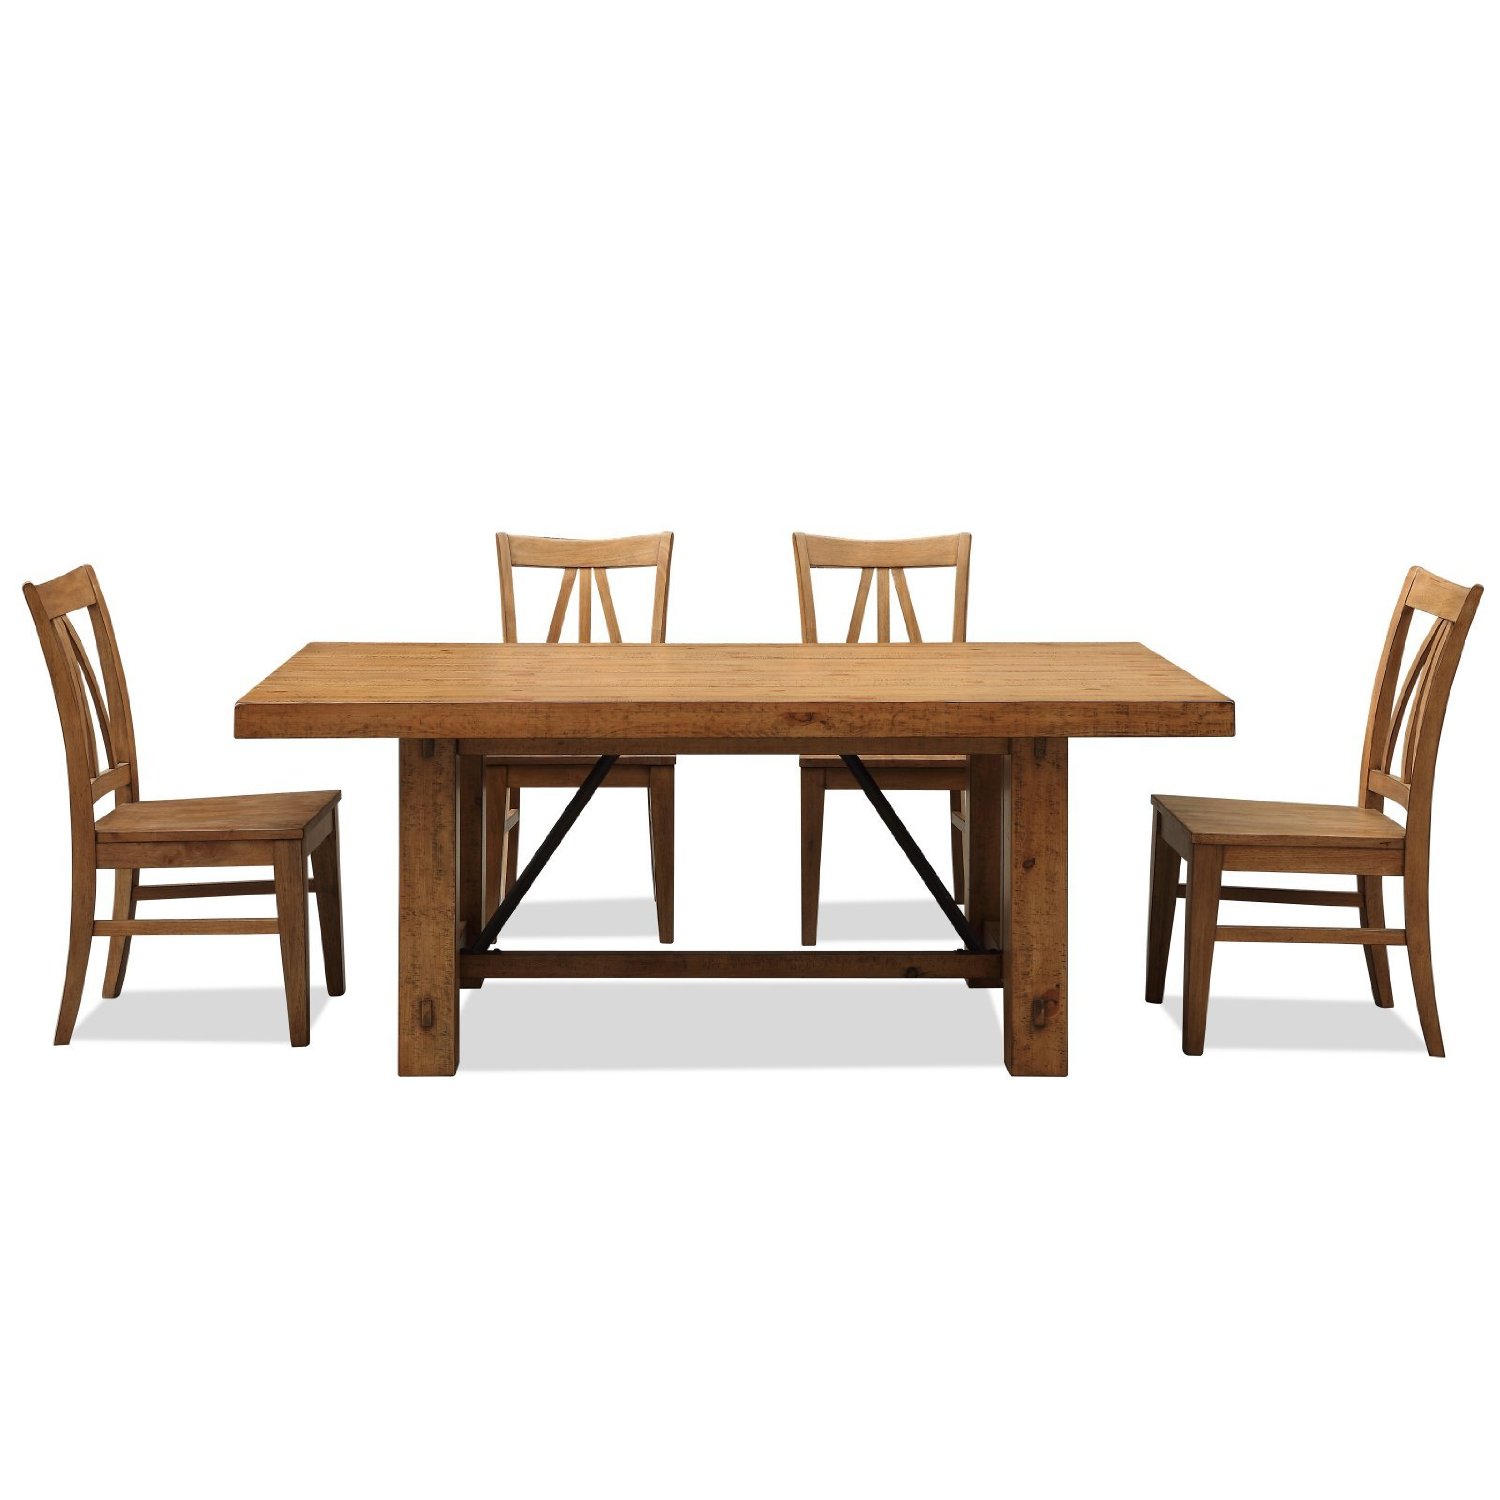 rustic dining set with bench photo - 3